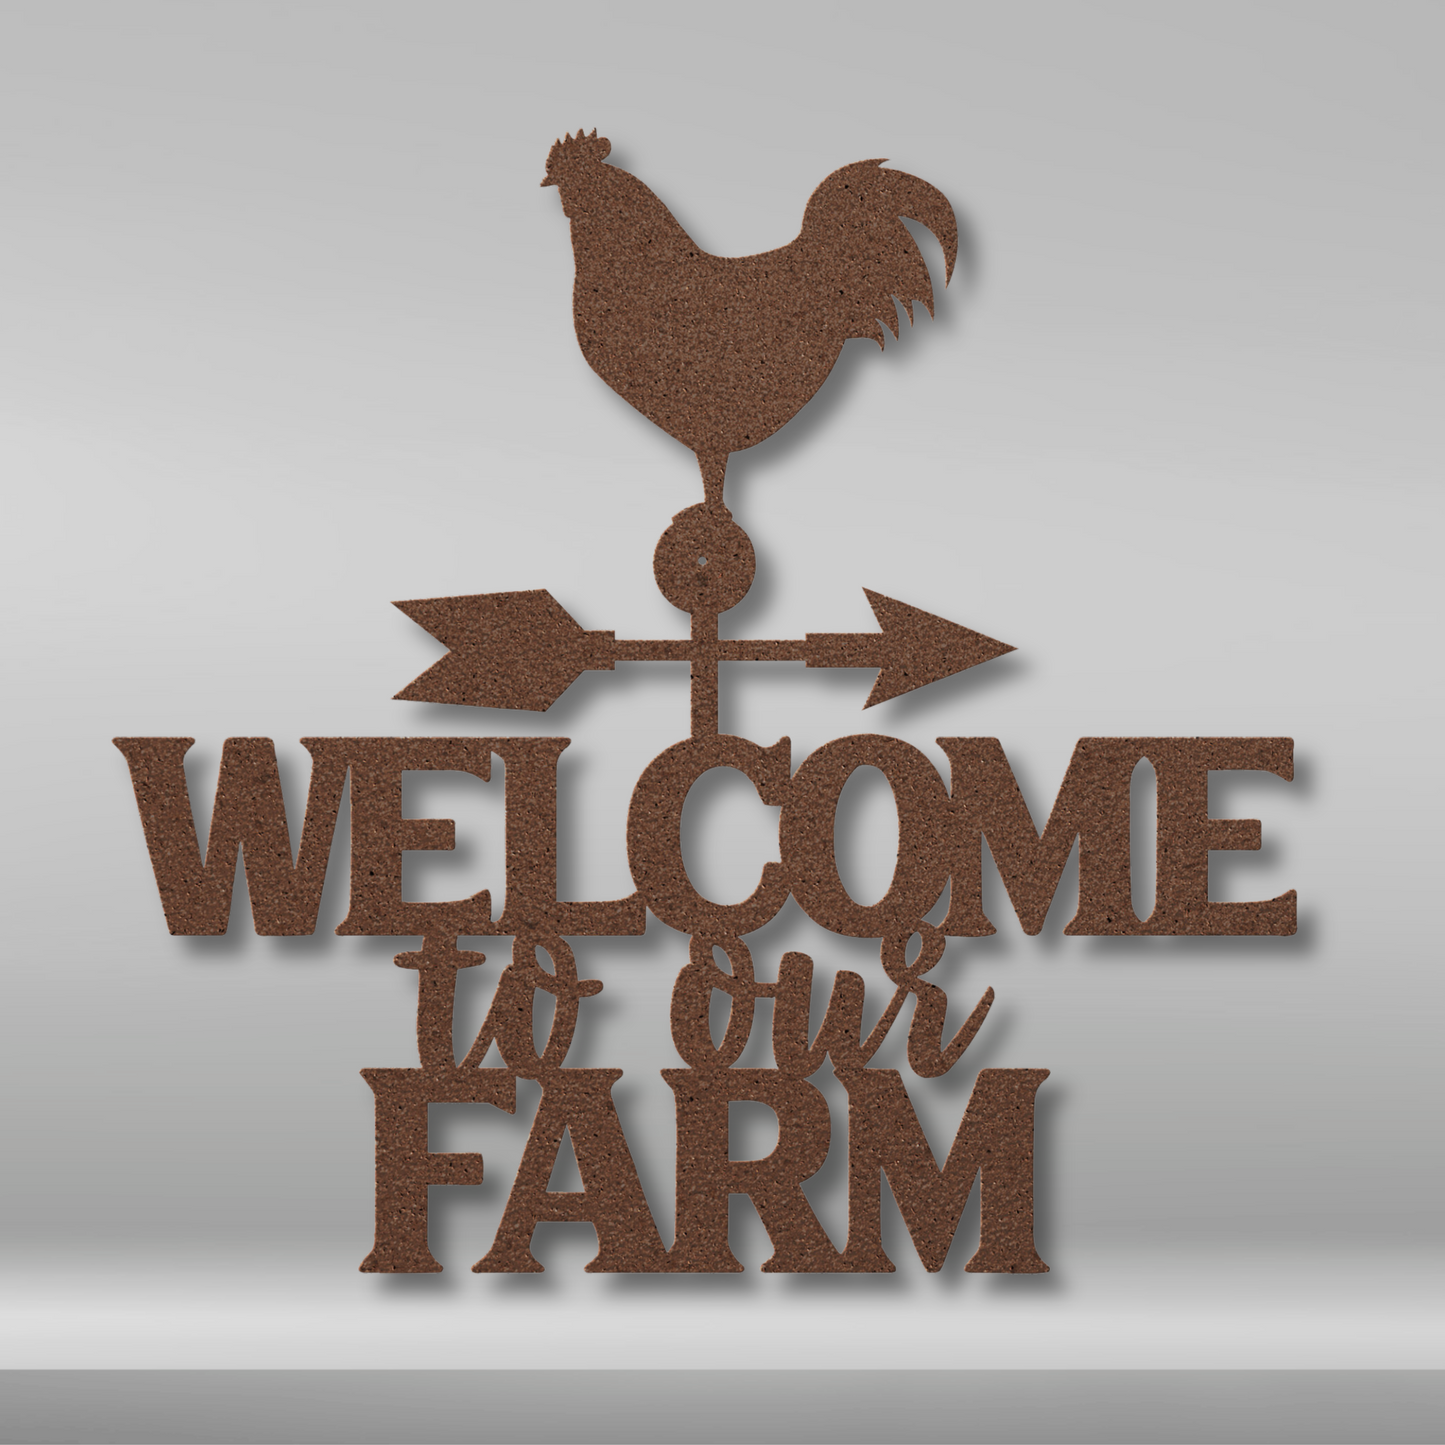 Welcome To Our Farm Metal Sign